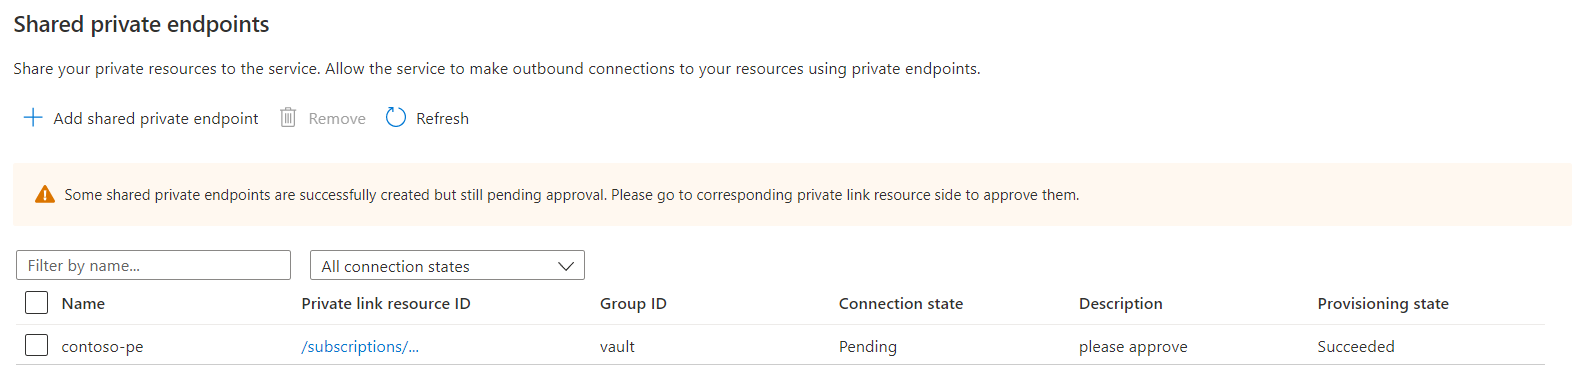 Screenshot of an added shared private endpoint.